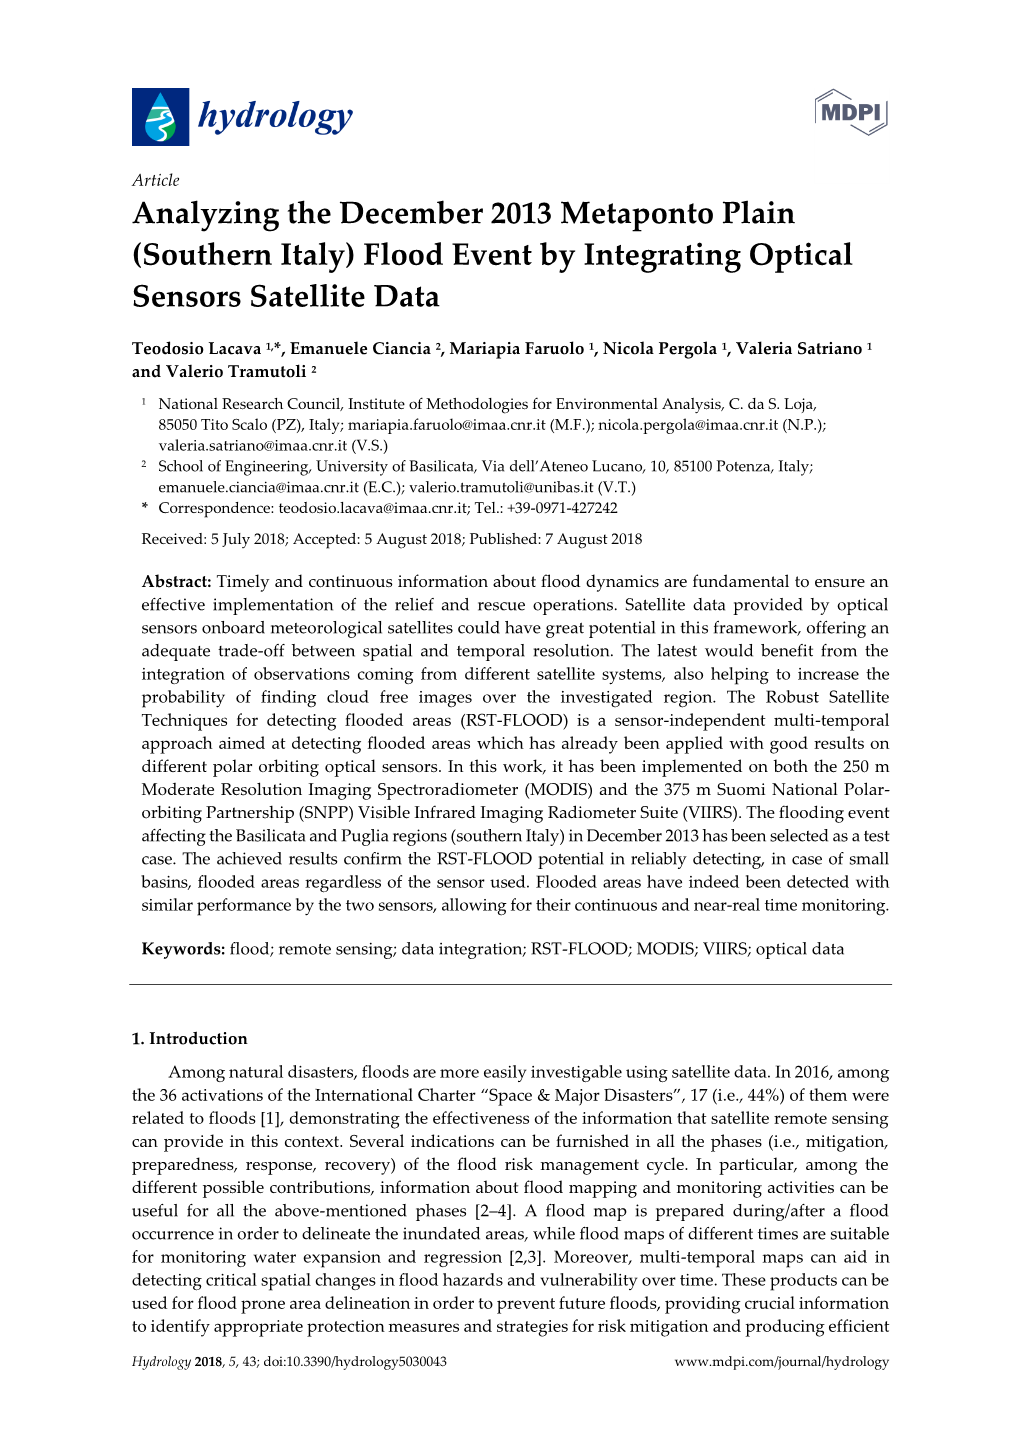 Analyzing the December 2013 Metaponto Plain (Southern Italy) Flood Event by Integrating Optical Sensors Satellite Data